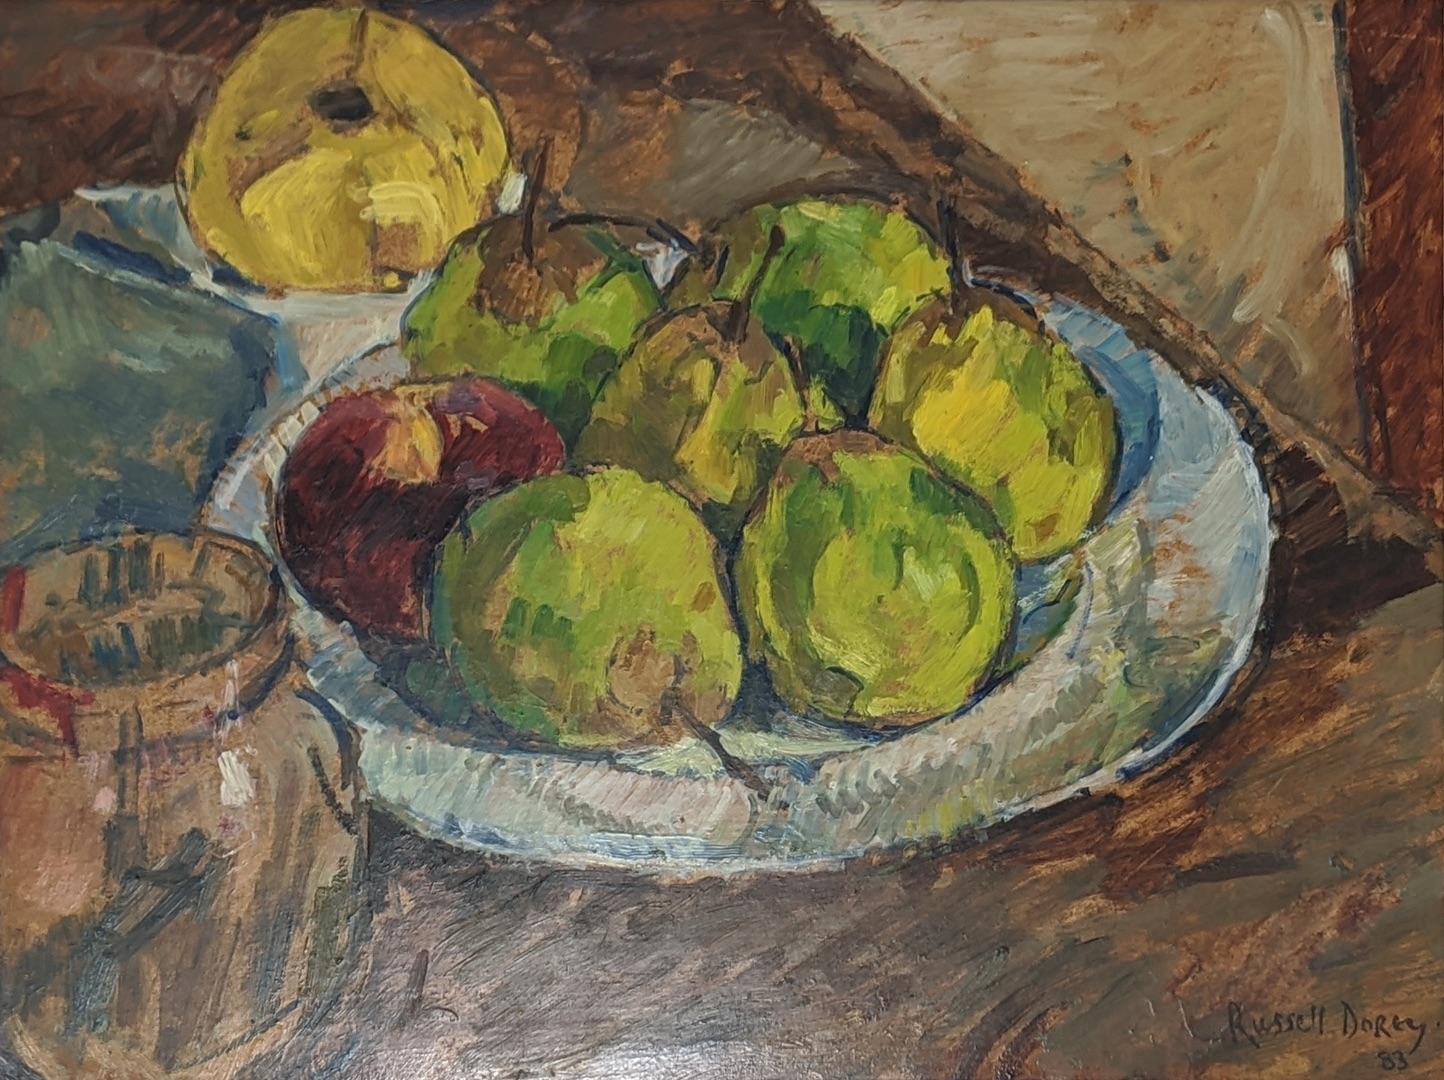 Russell Dorey (20th century British School), Still Life of Pears, 1983, oil on board, signed lower